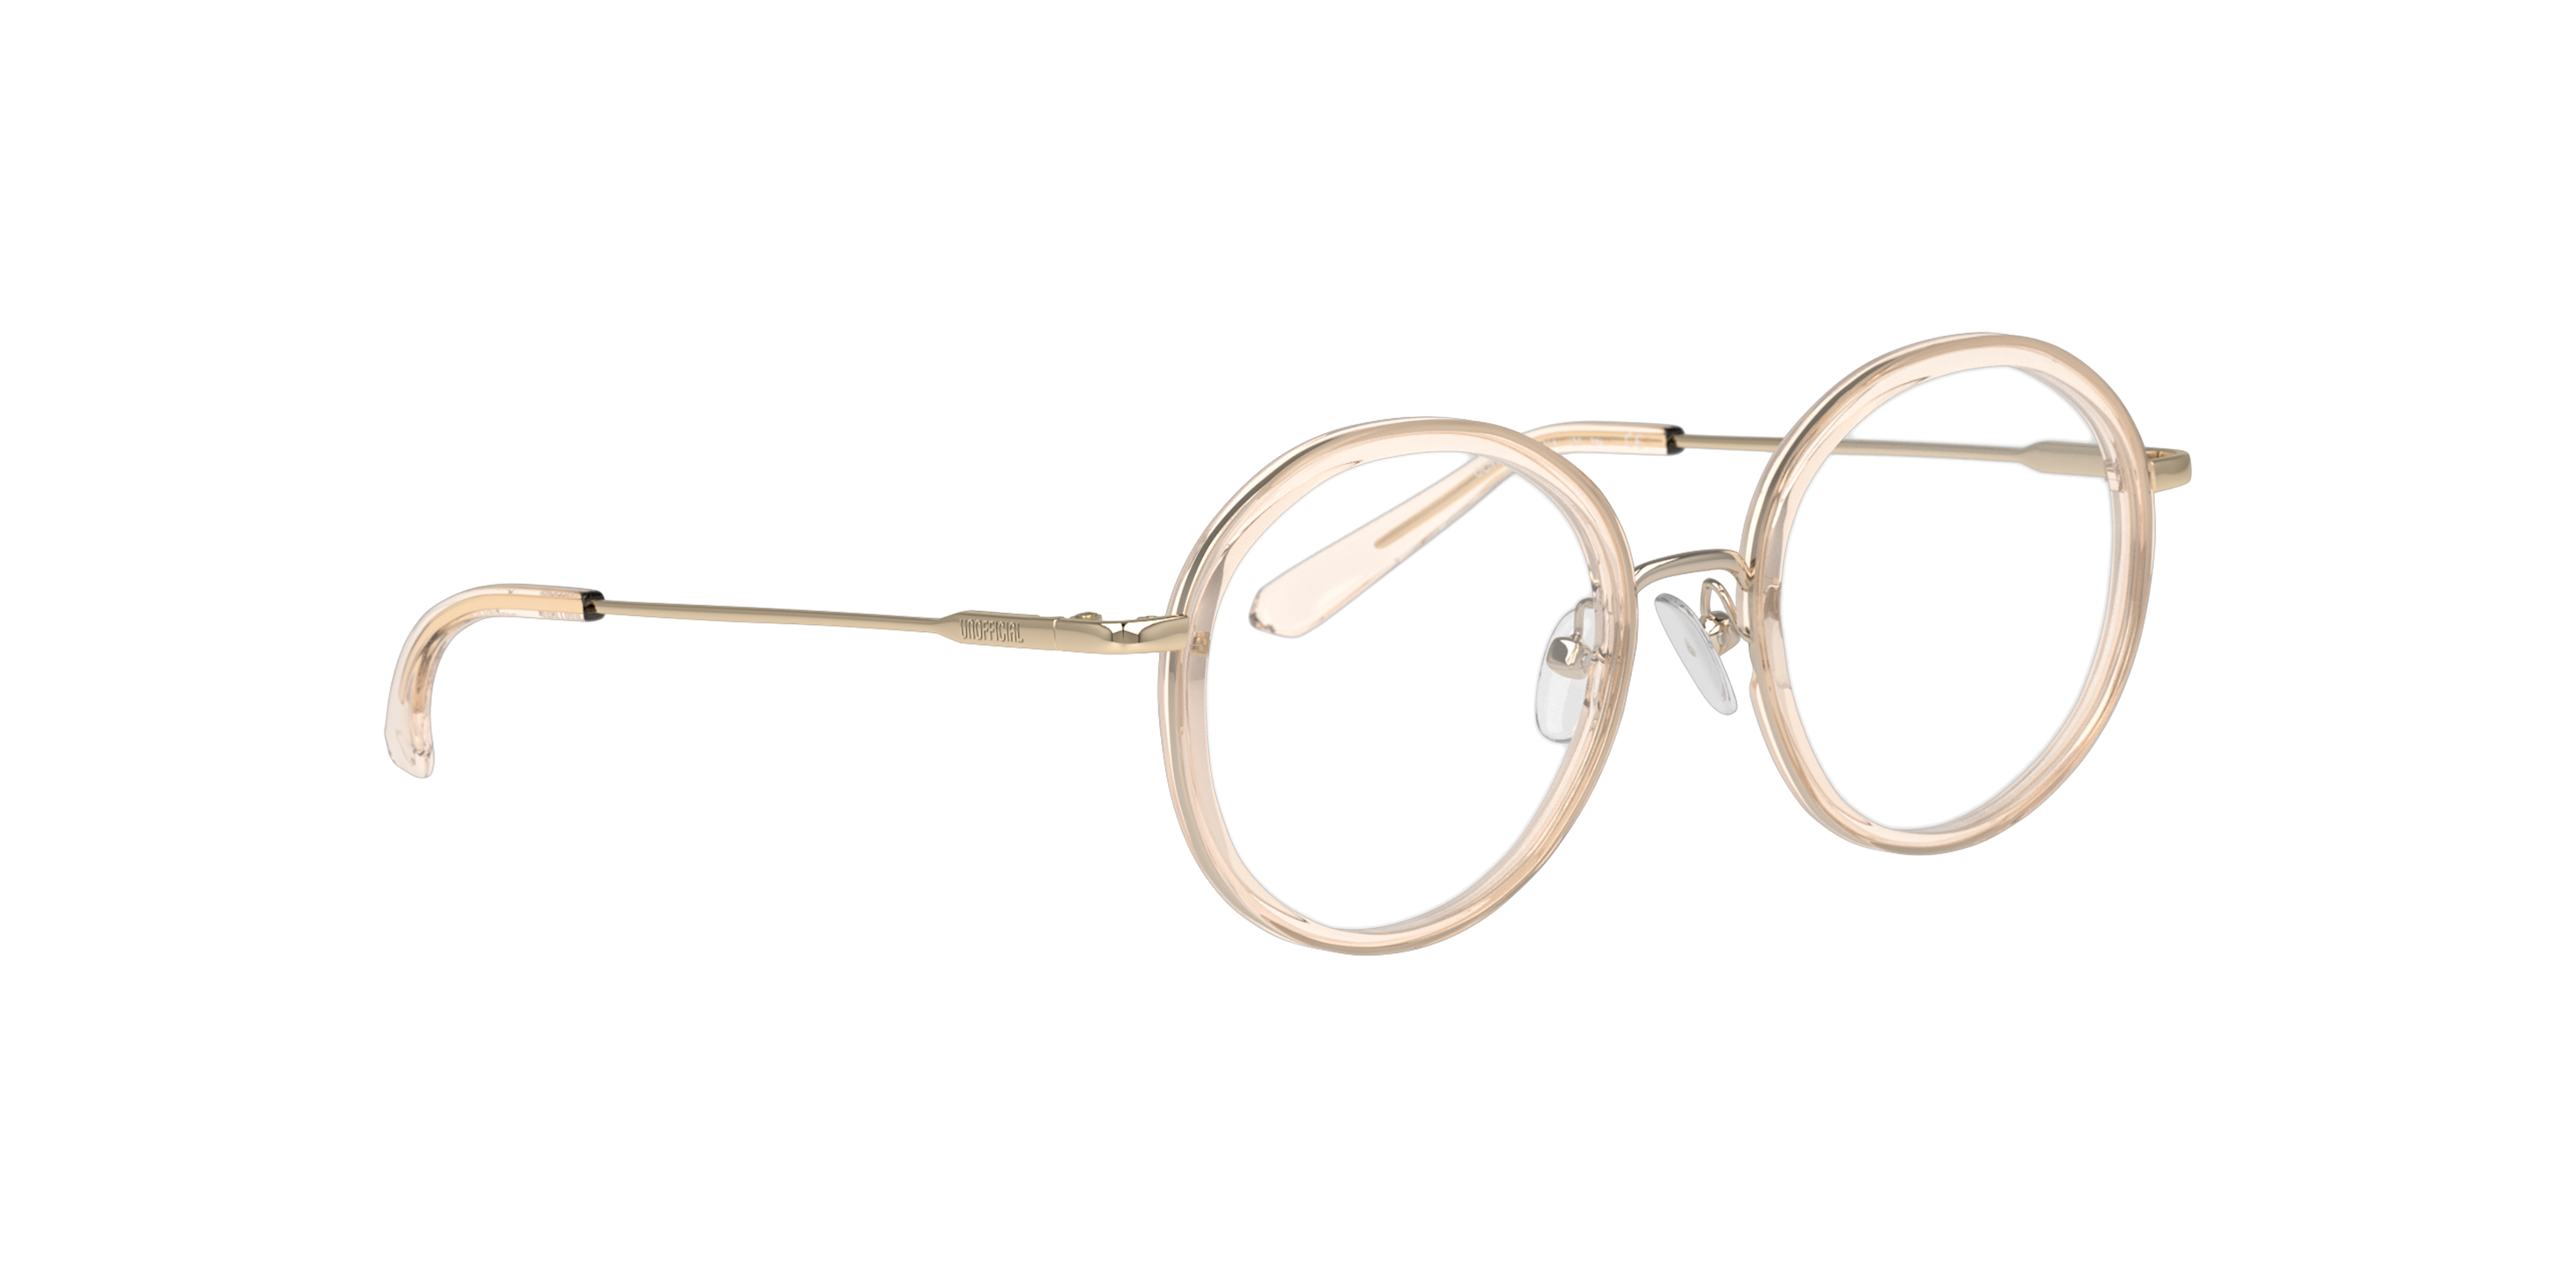 Angle_Right01 Unofficial UNOF0216 (FD00) Glasses Transparent / Beige